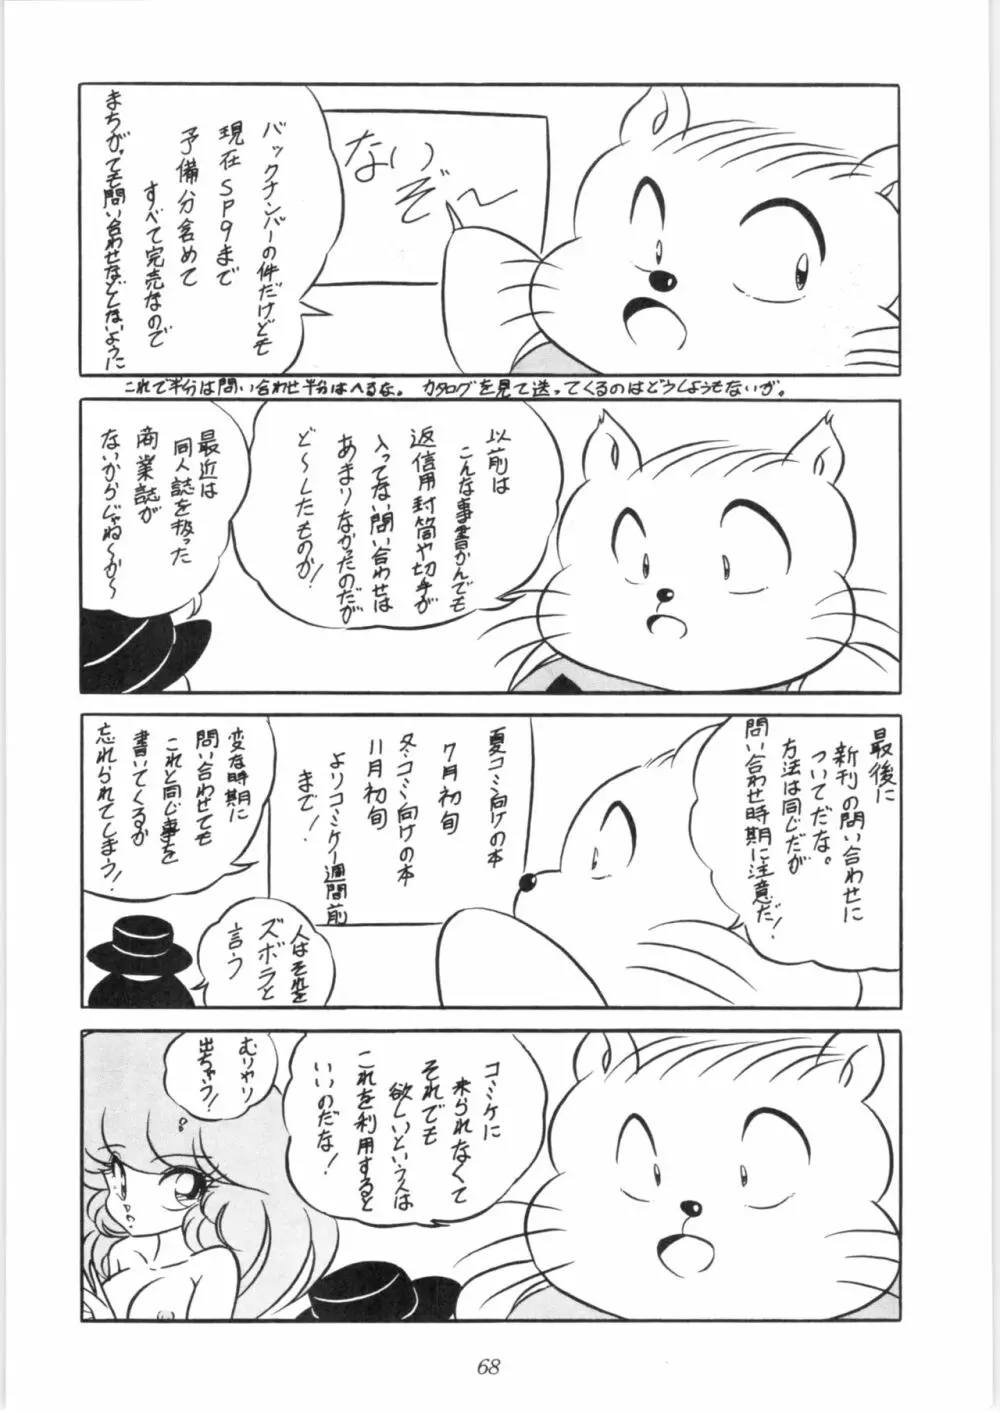 C-COMPANY SPECIAL STAGE 10 - page69